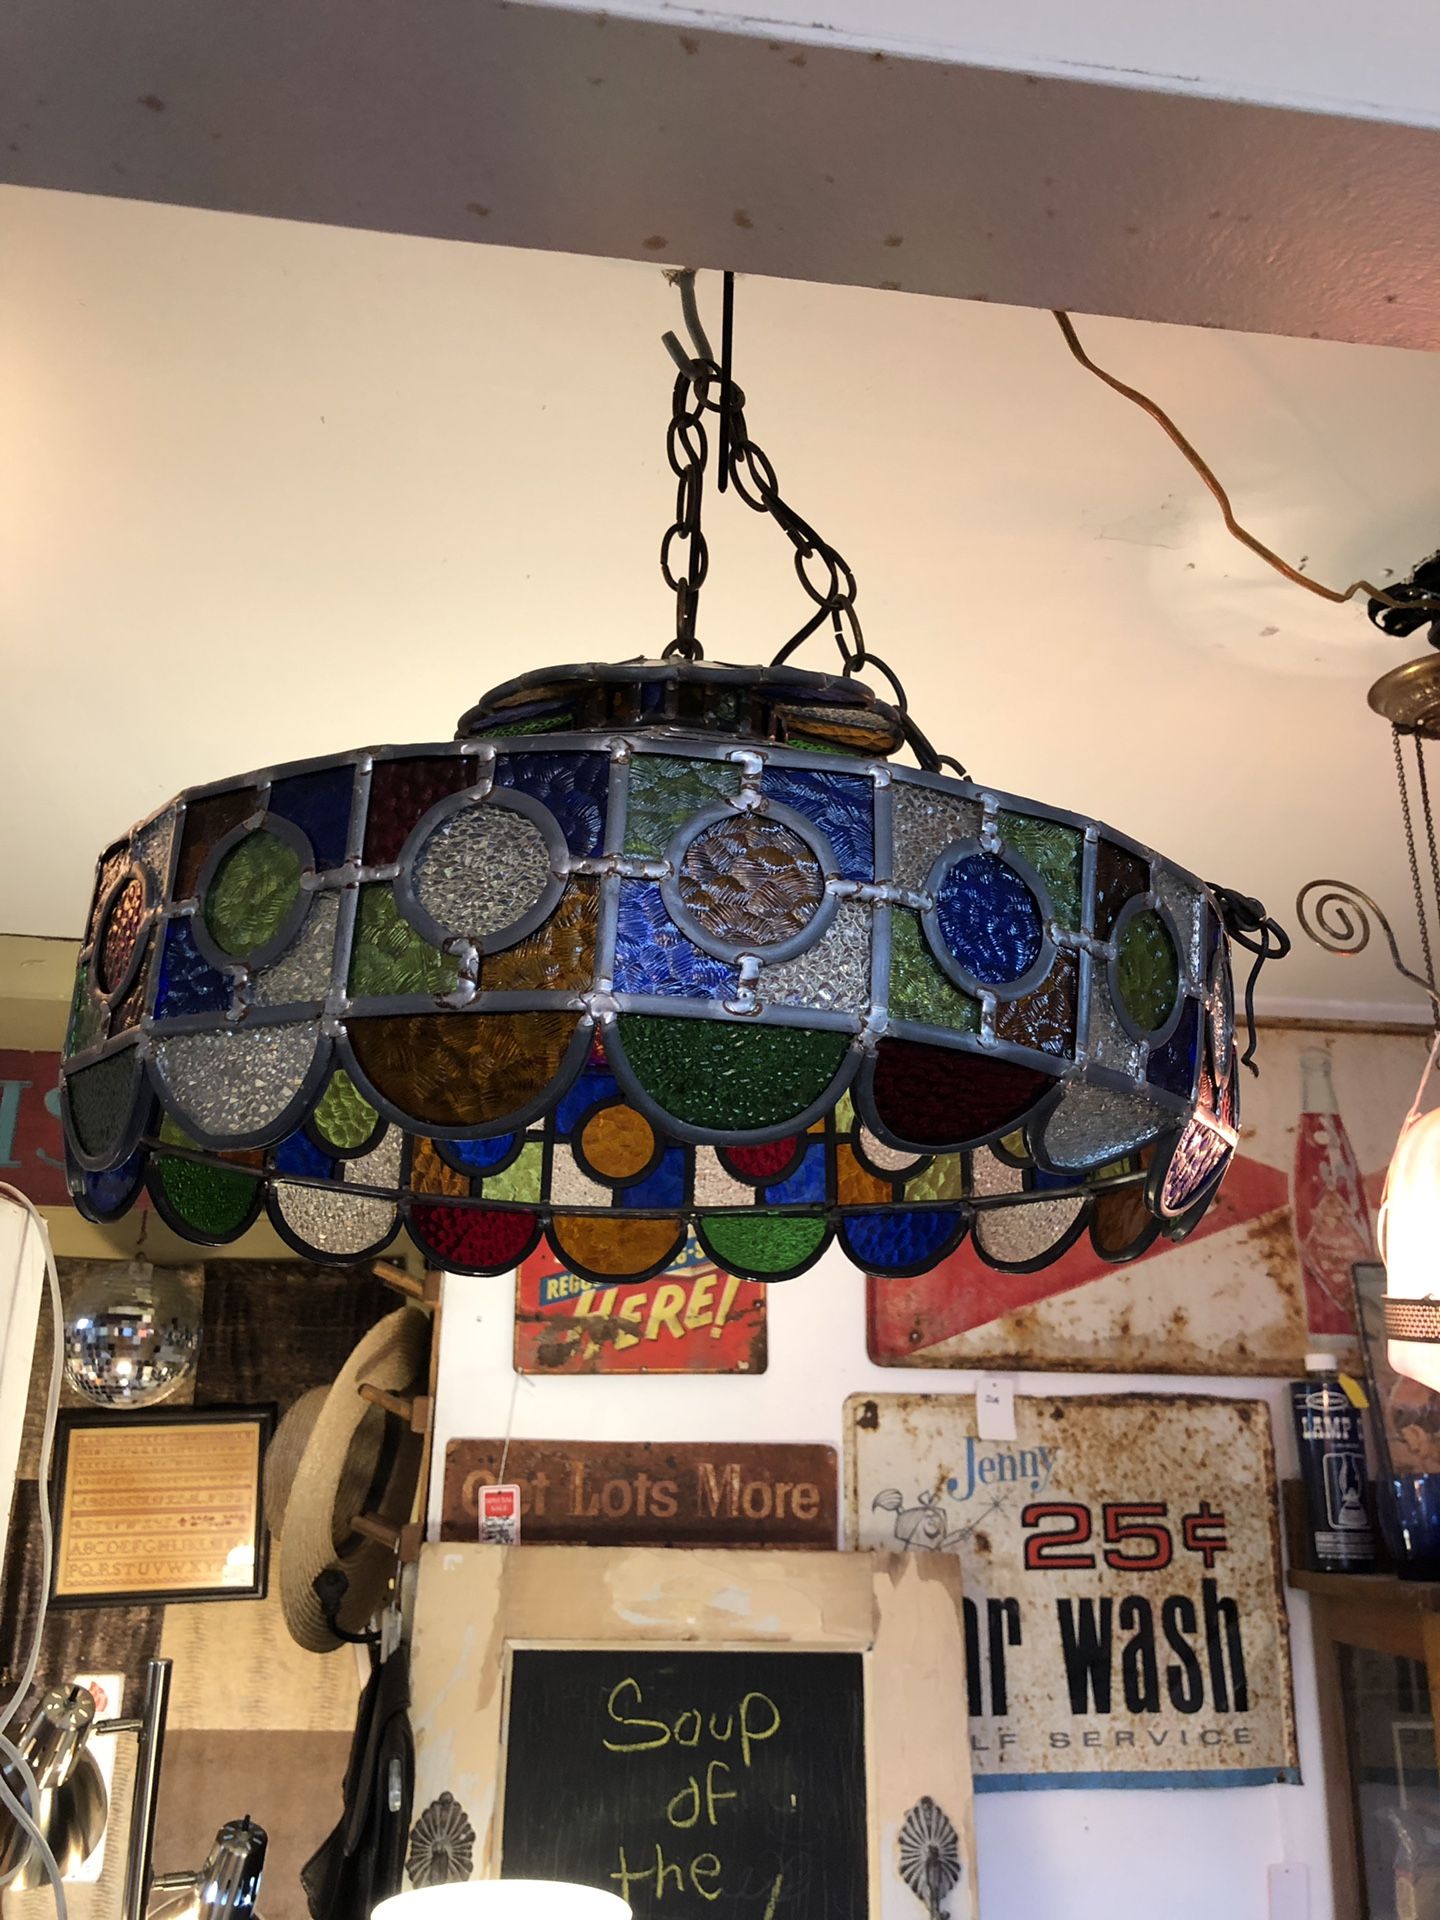 20x9 antique vintage stained glass multi colored light fixture 45.00. Johanna. Furniture collectibles sterling silver please text to be sure it’s sti